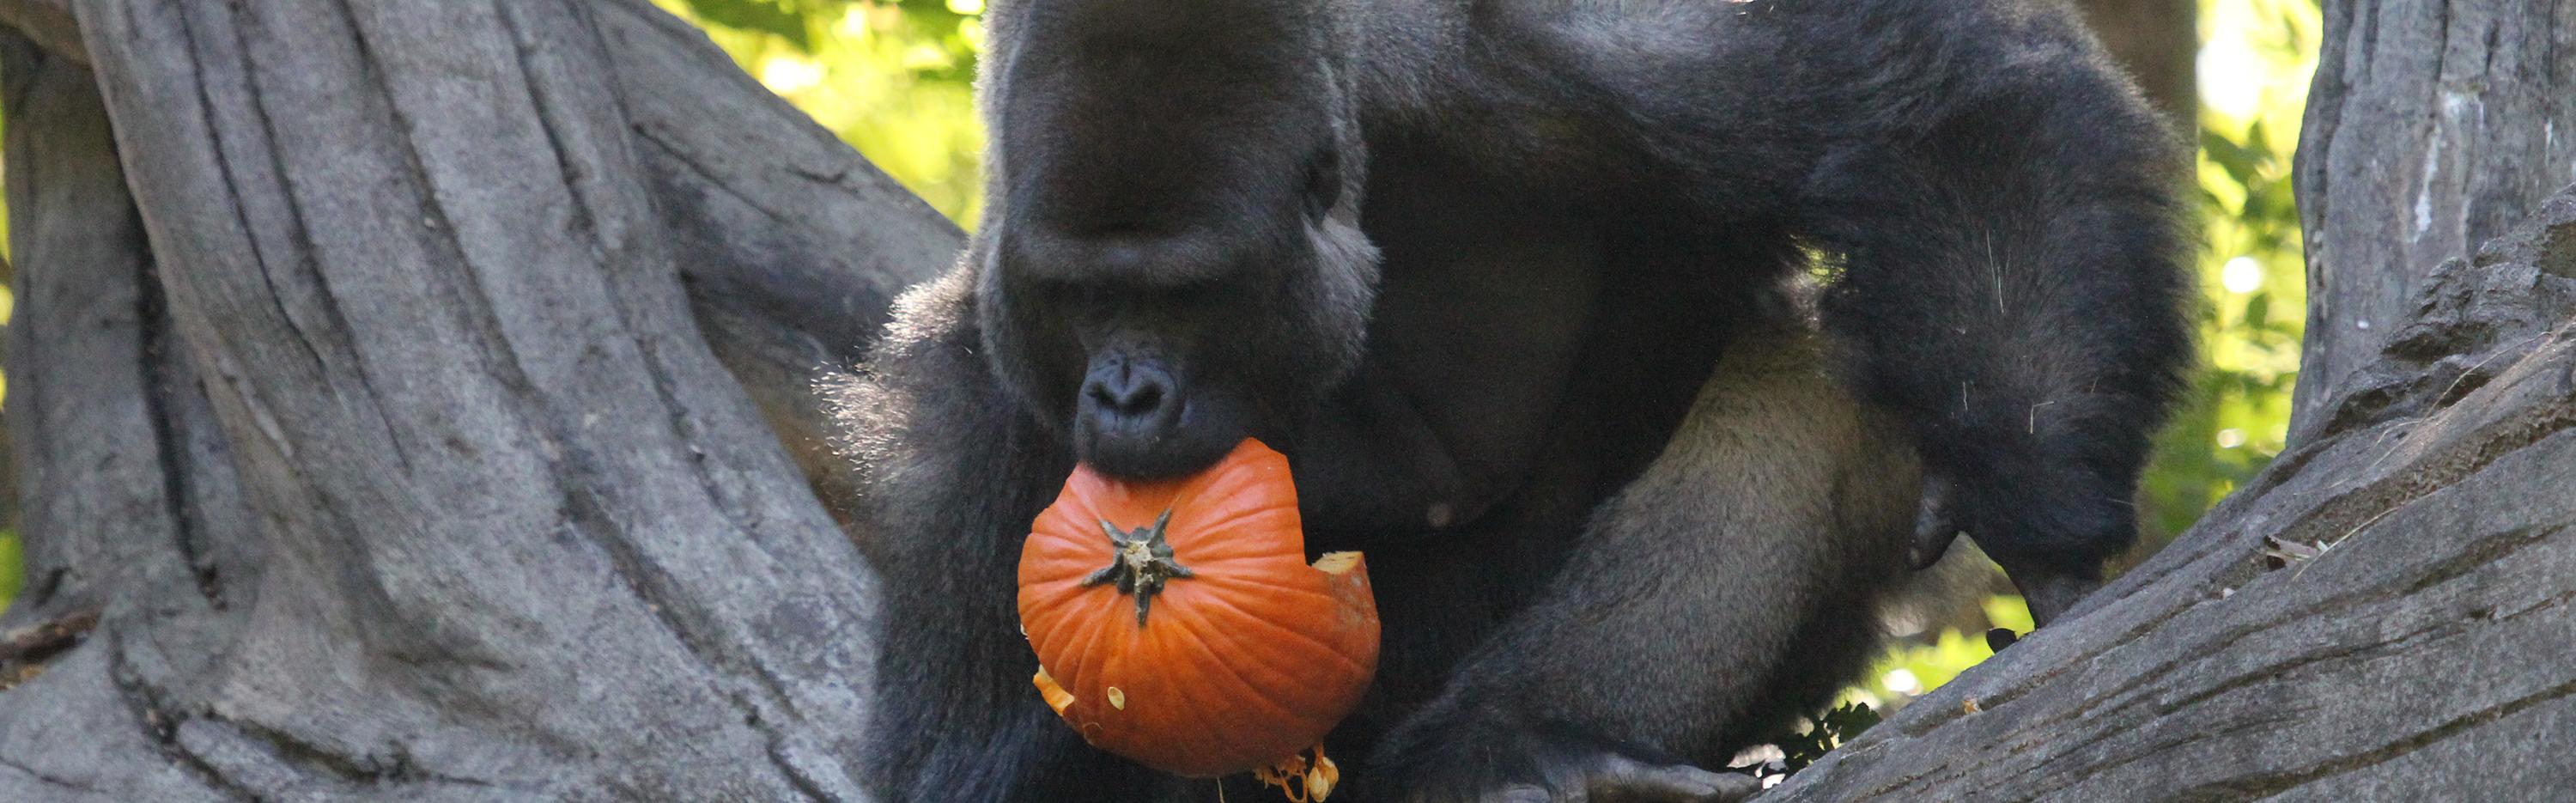 Gorilla carries pumpkin in his mouth